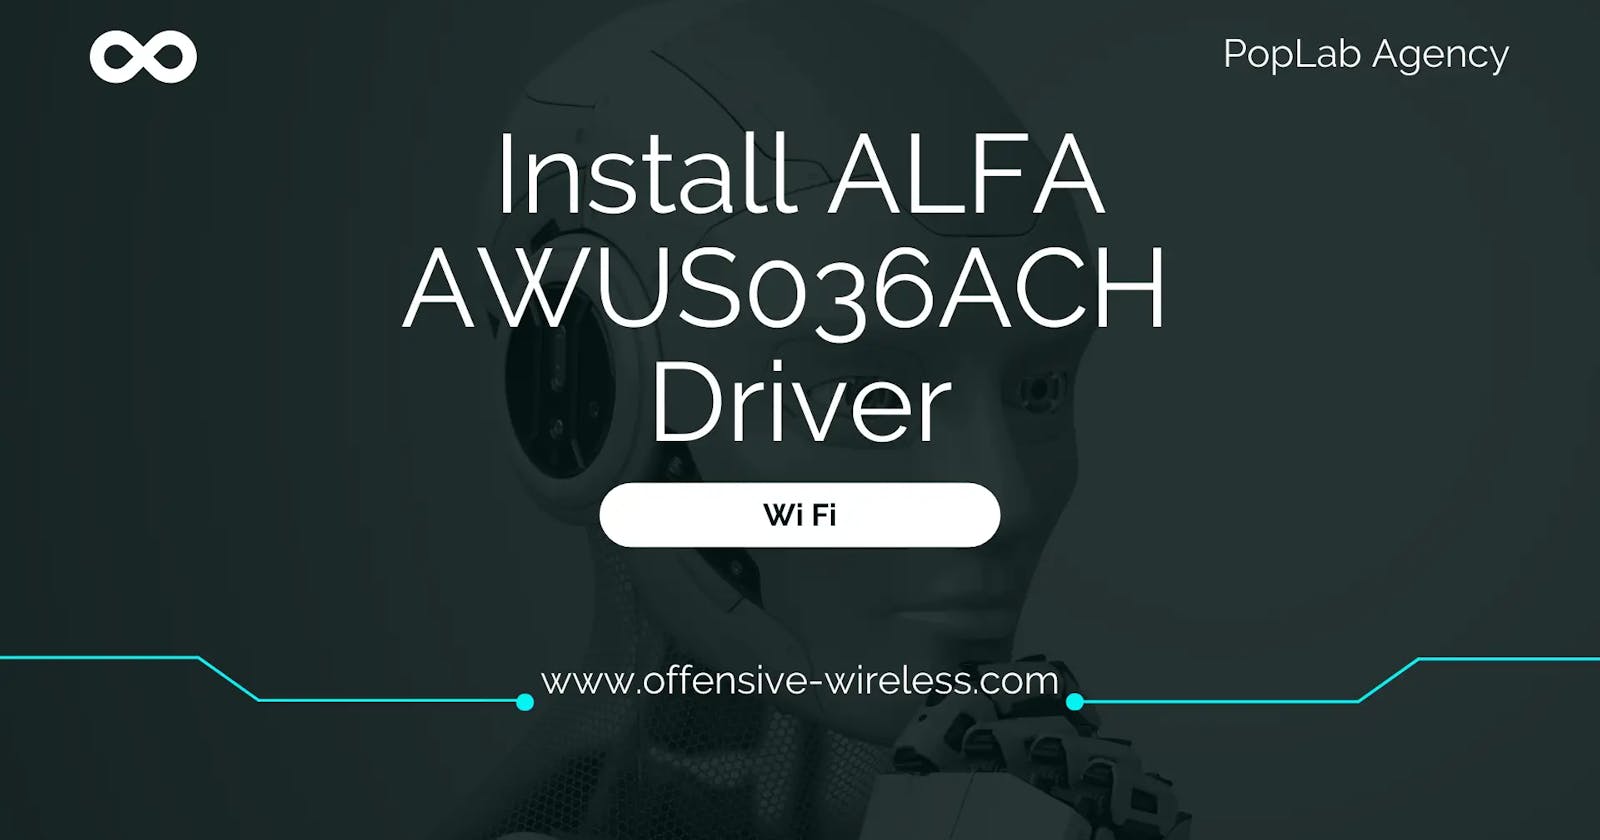 How to Install ALFA AC1200 AWUS036ACH Driver